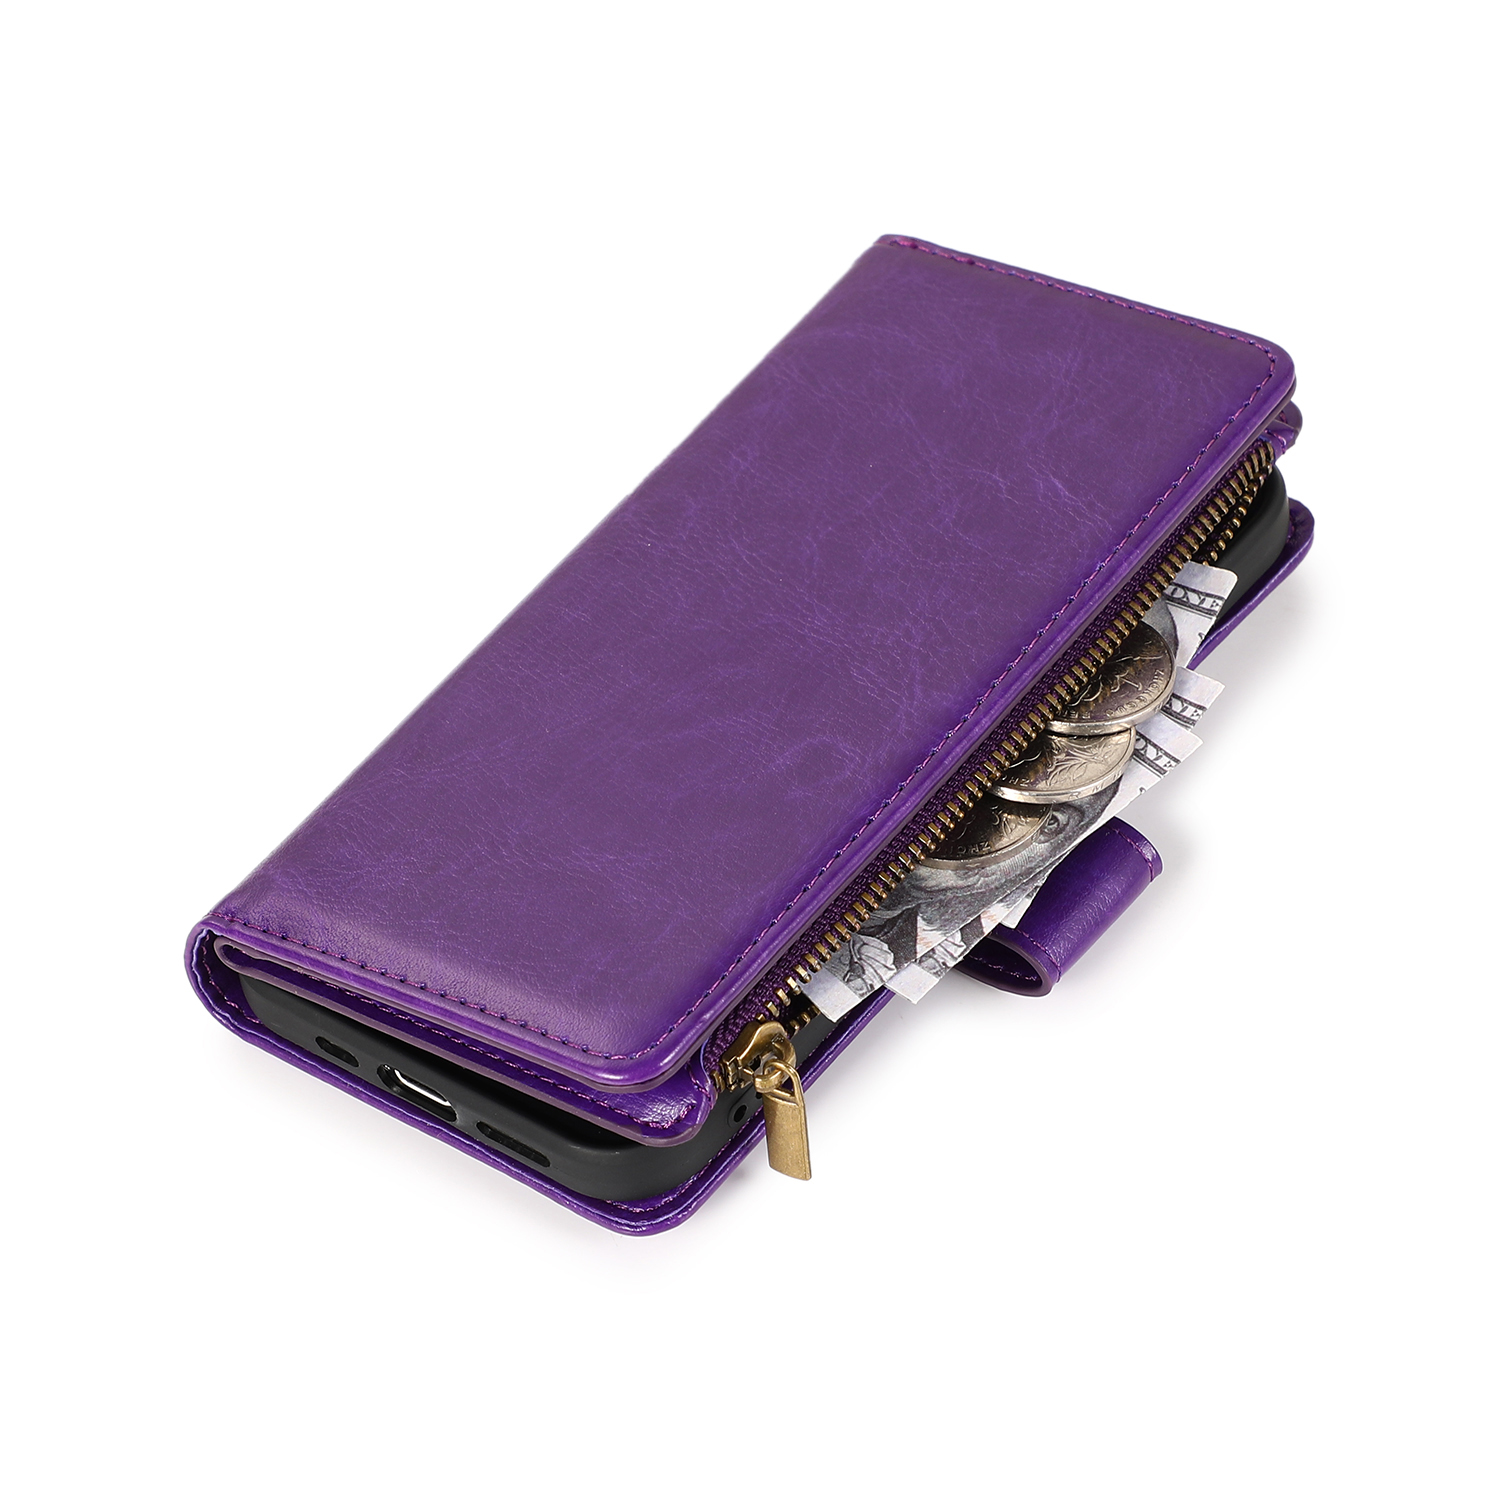 for Samsung Galaxy S21 Ultra (6.8") Leather Zipper Wallet Case 9 Credit Card Slots Cash Money Pocket Clutch Pouch Stand & Strap Cover ,Xpm Phone Case [Purple] - image 5 of 8